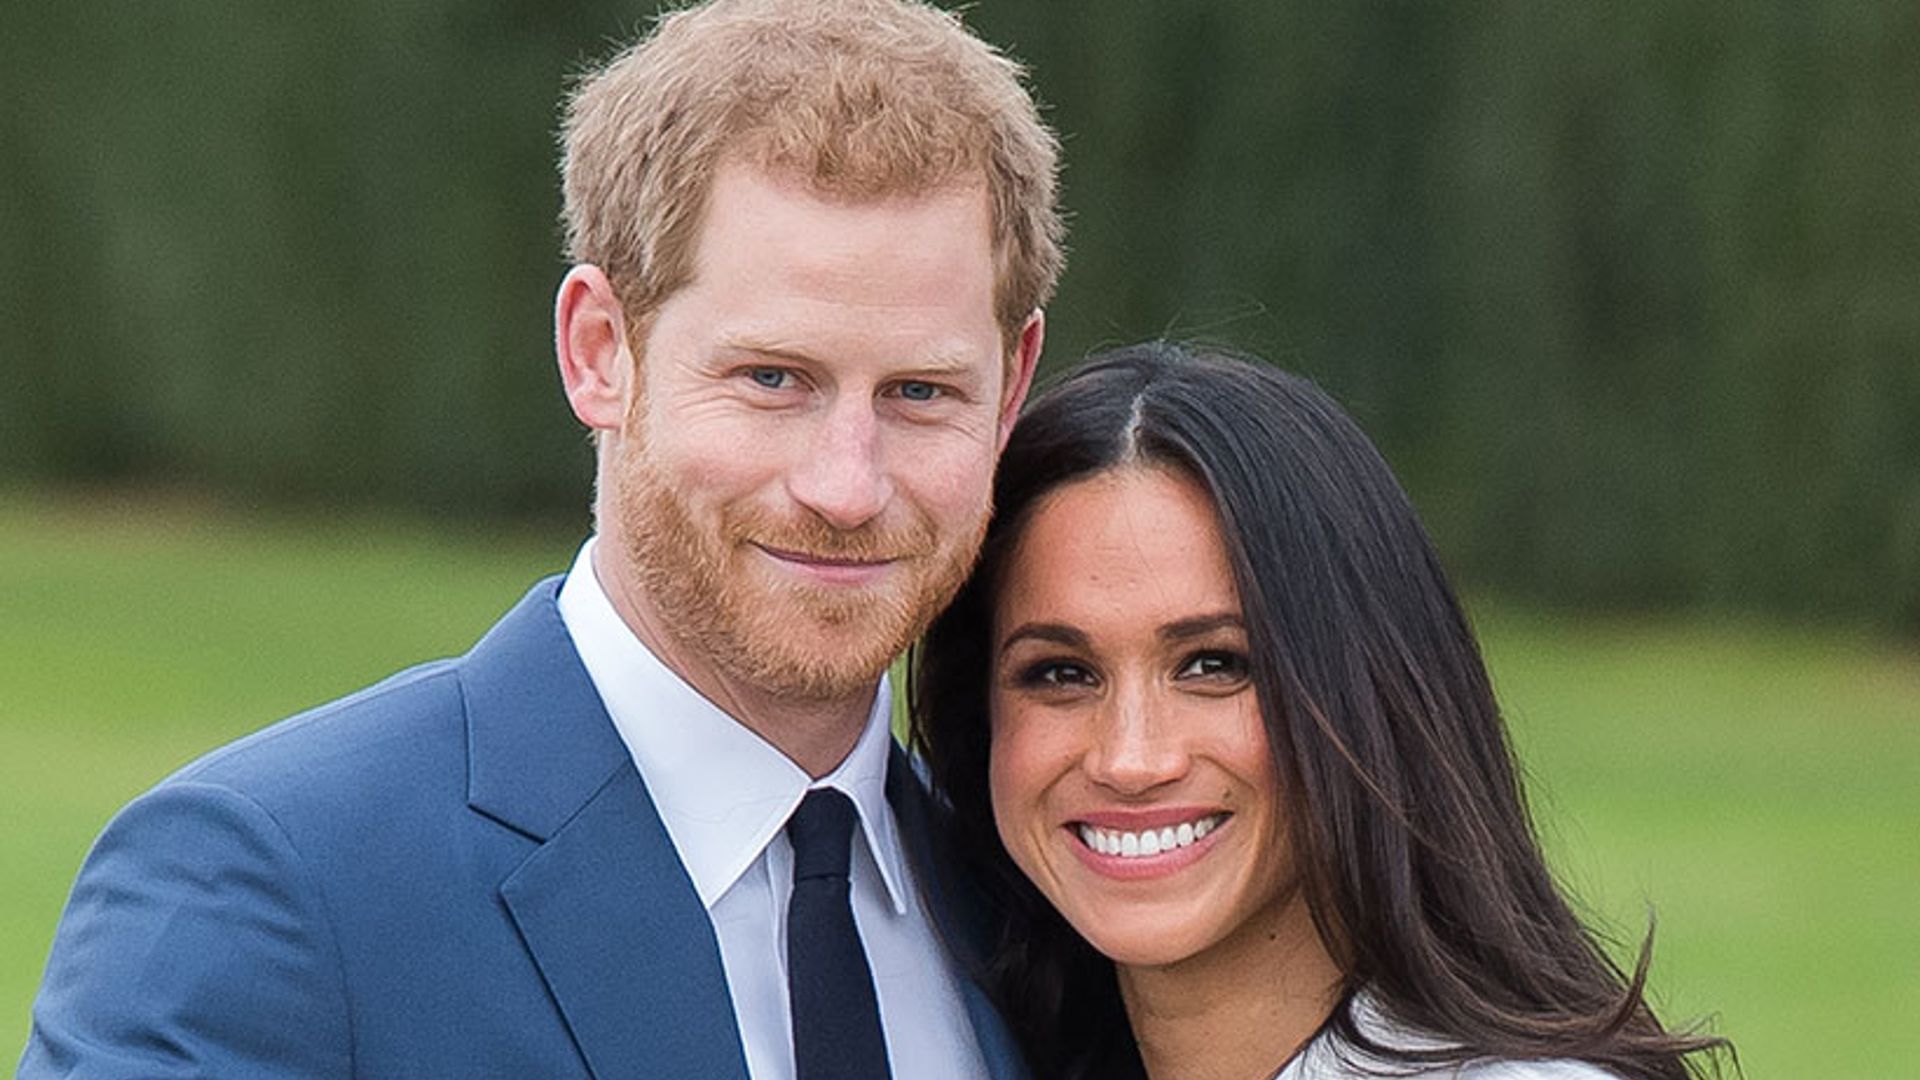 Prince Harry and Meghan Markle wedding: Who will make the guest list?